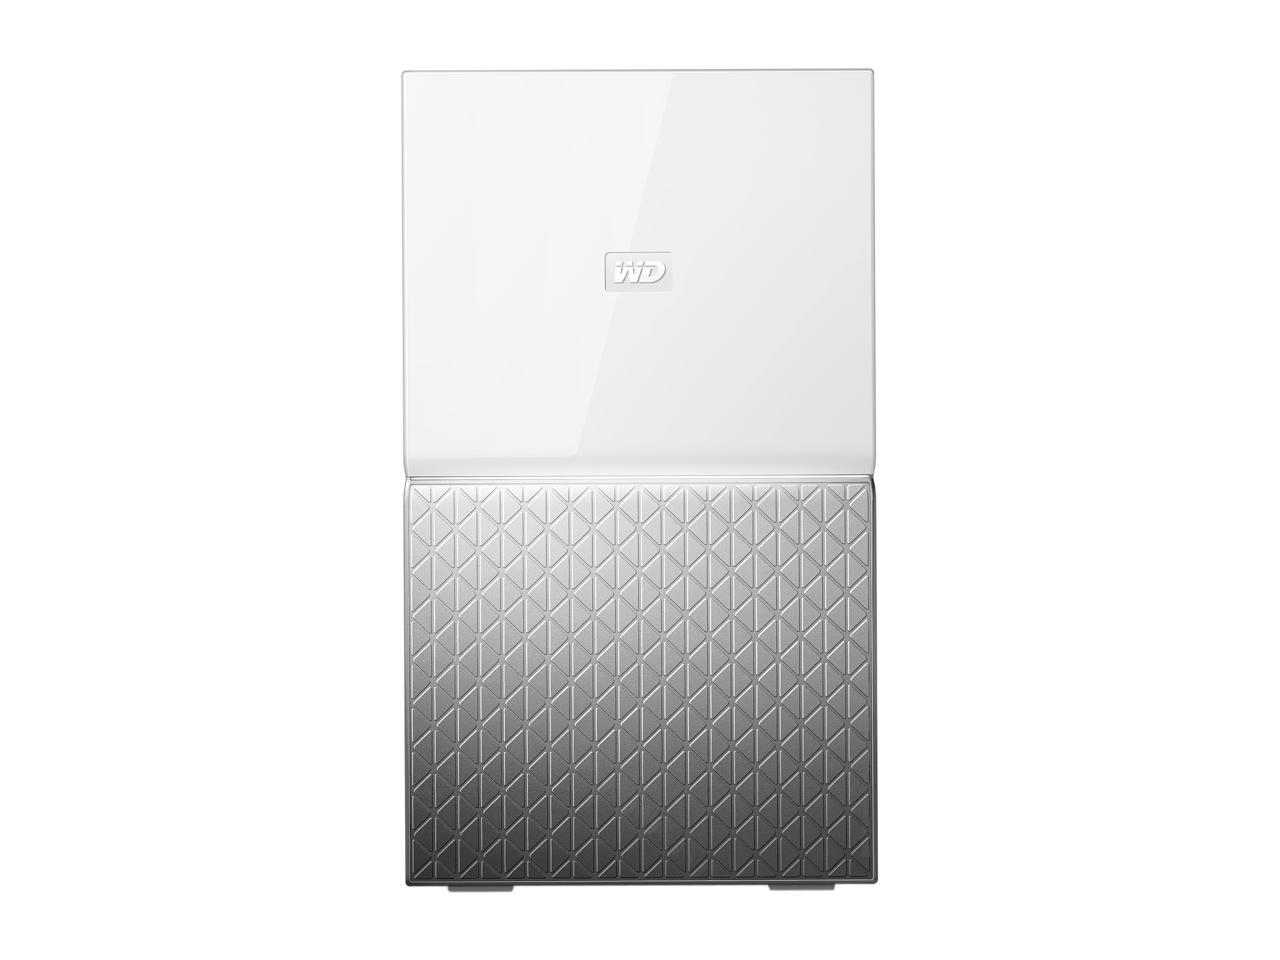 WD 16TB My Cloud Home Duo Personal Cloud Storage (iOS/Android & Mac/PC Compatible) - (WDBMUT0160JWT-NESN)